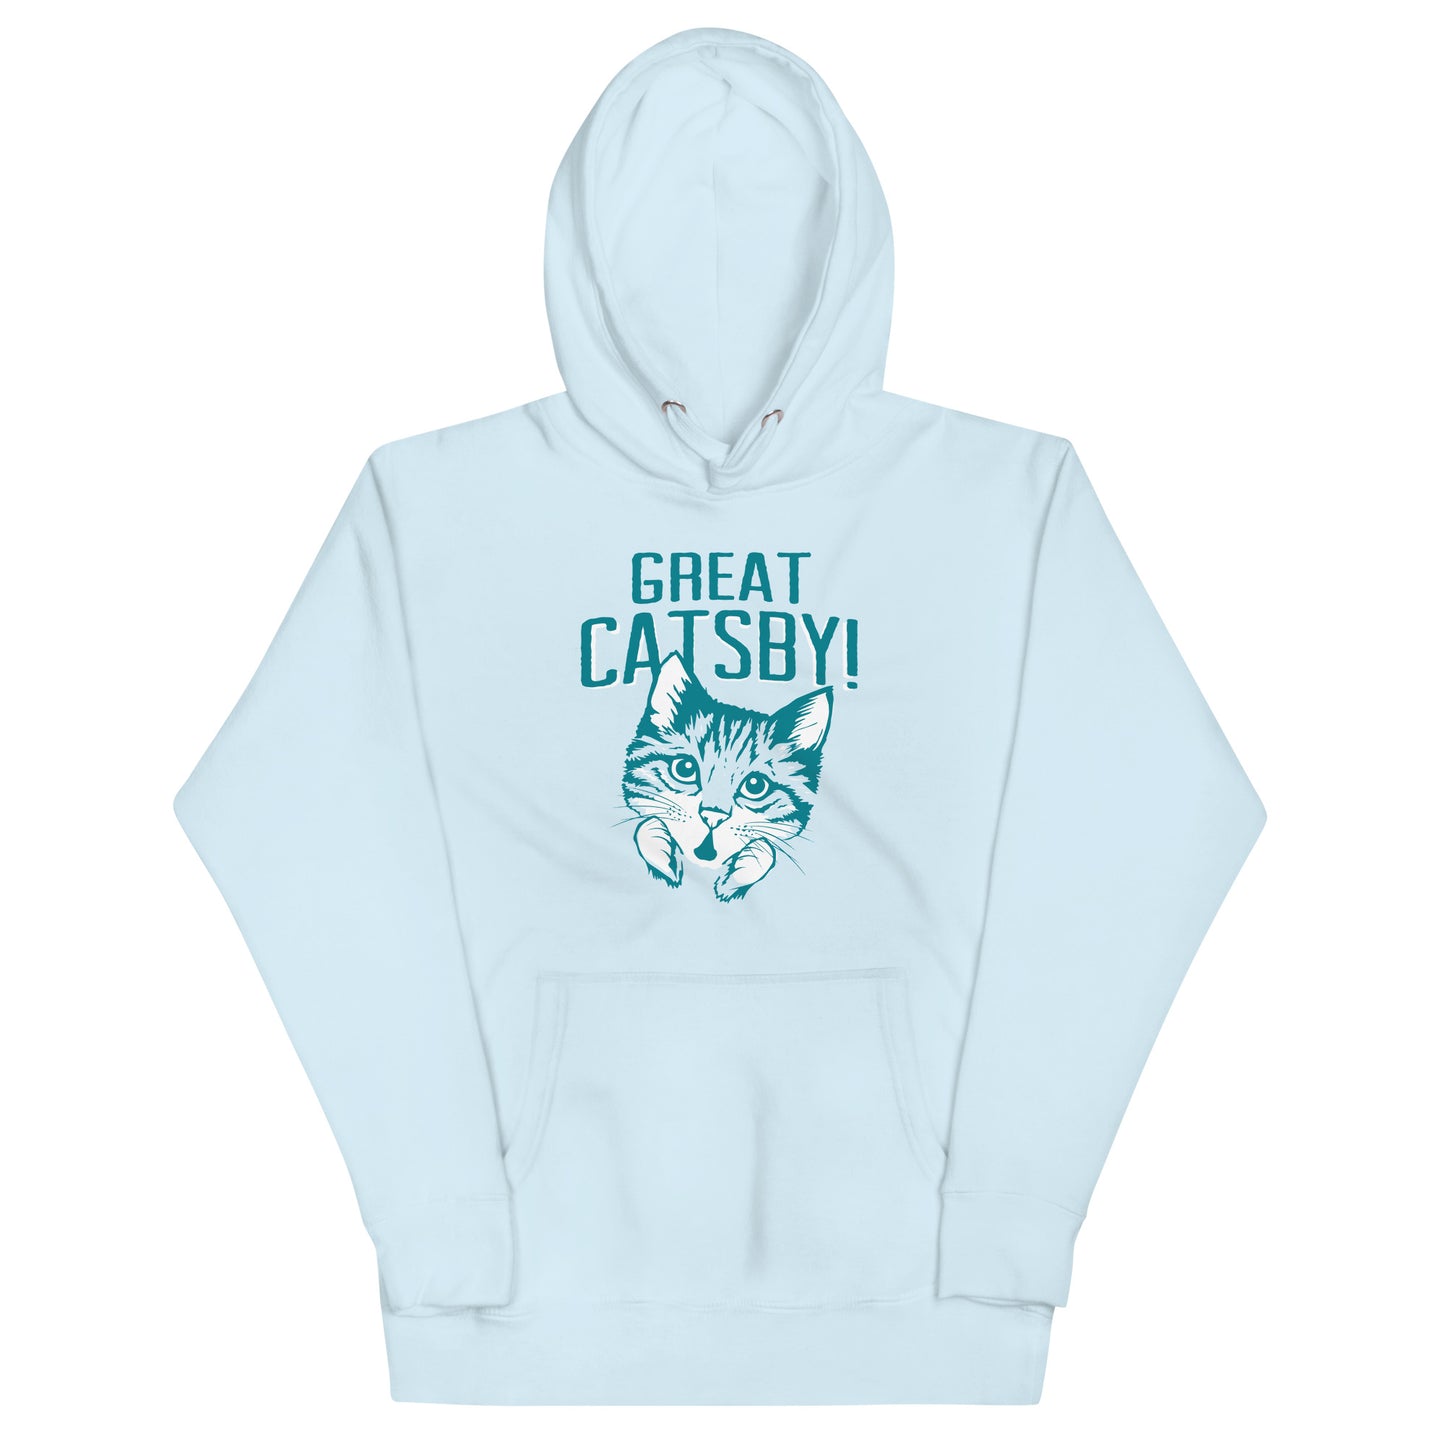 Great Catsby! Unisex Hoodie